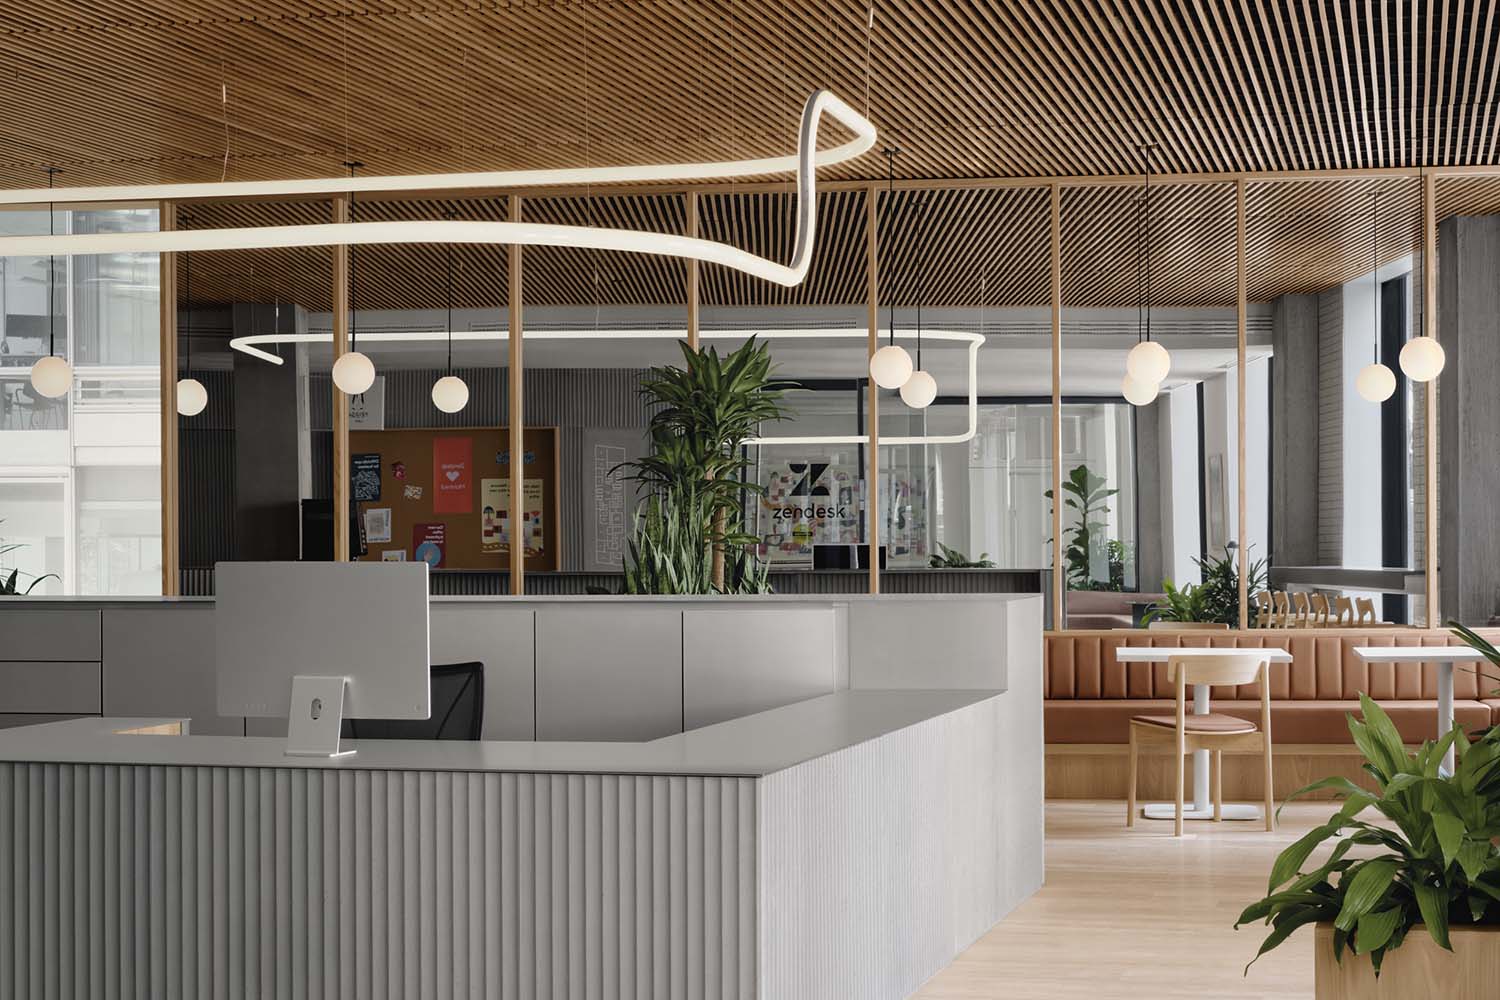 Zendesk Montreal Office Space Designed by MRDK and Studio MHA